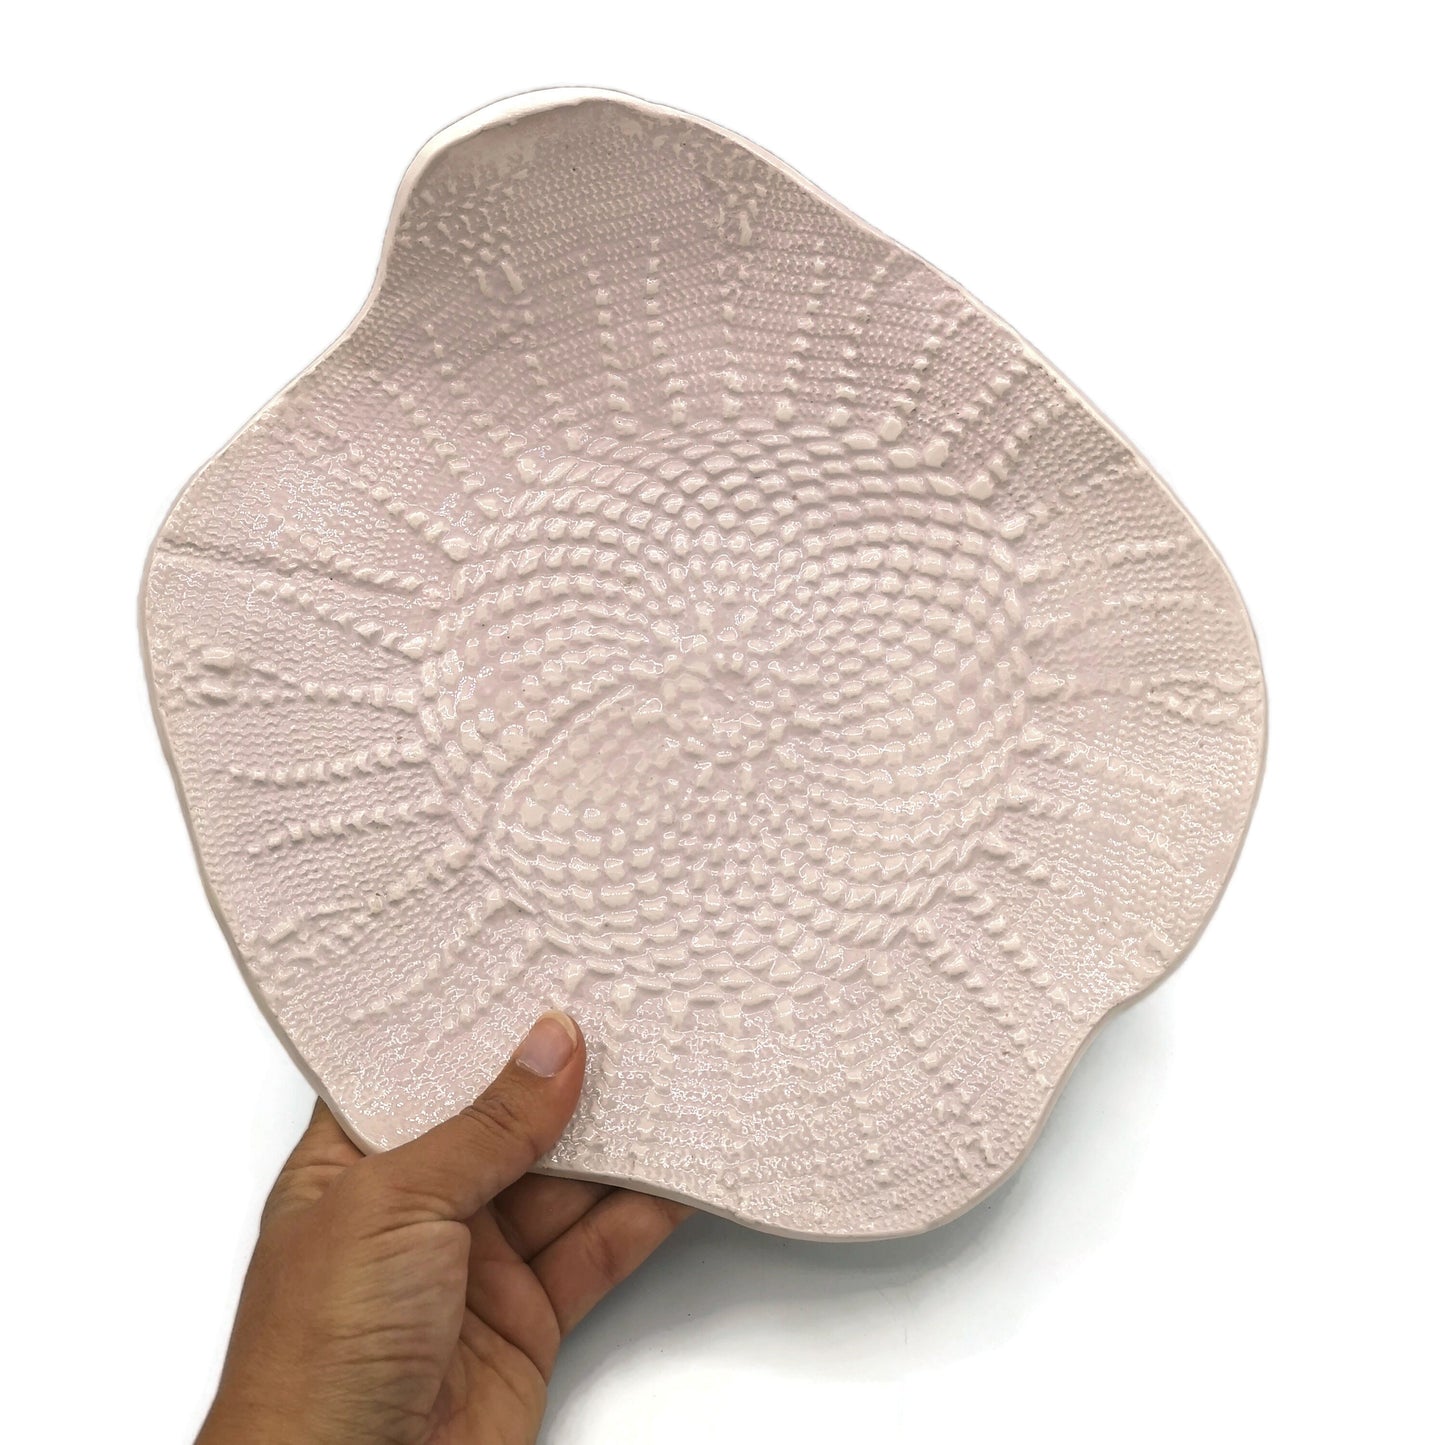 Handmade Ceramic Plate For Wall Decor With Decorative Vintage Lace Texture, Soft Pink Pottery Plate for Display With Organic Shape - Ceramica Ana Rafael